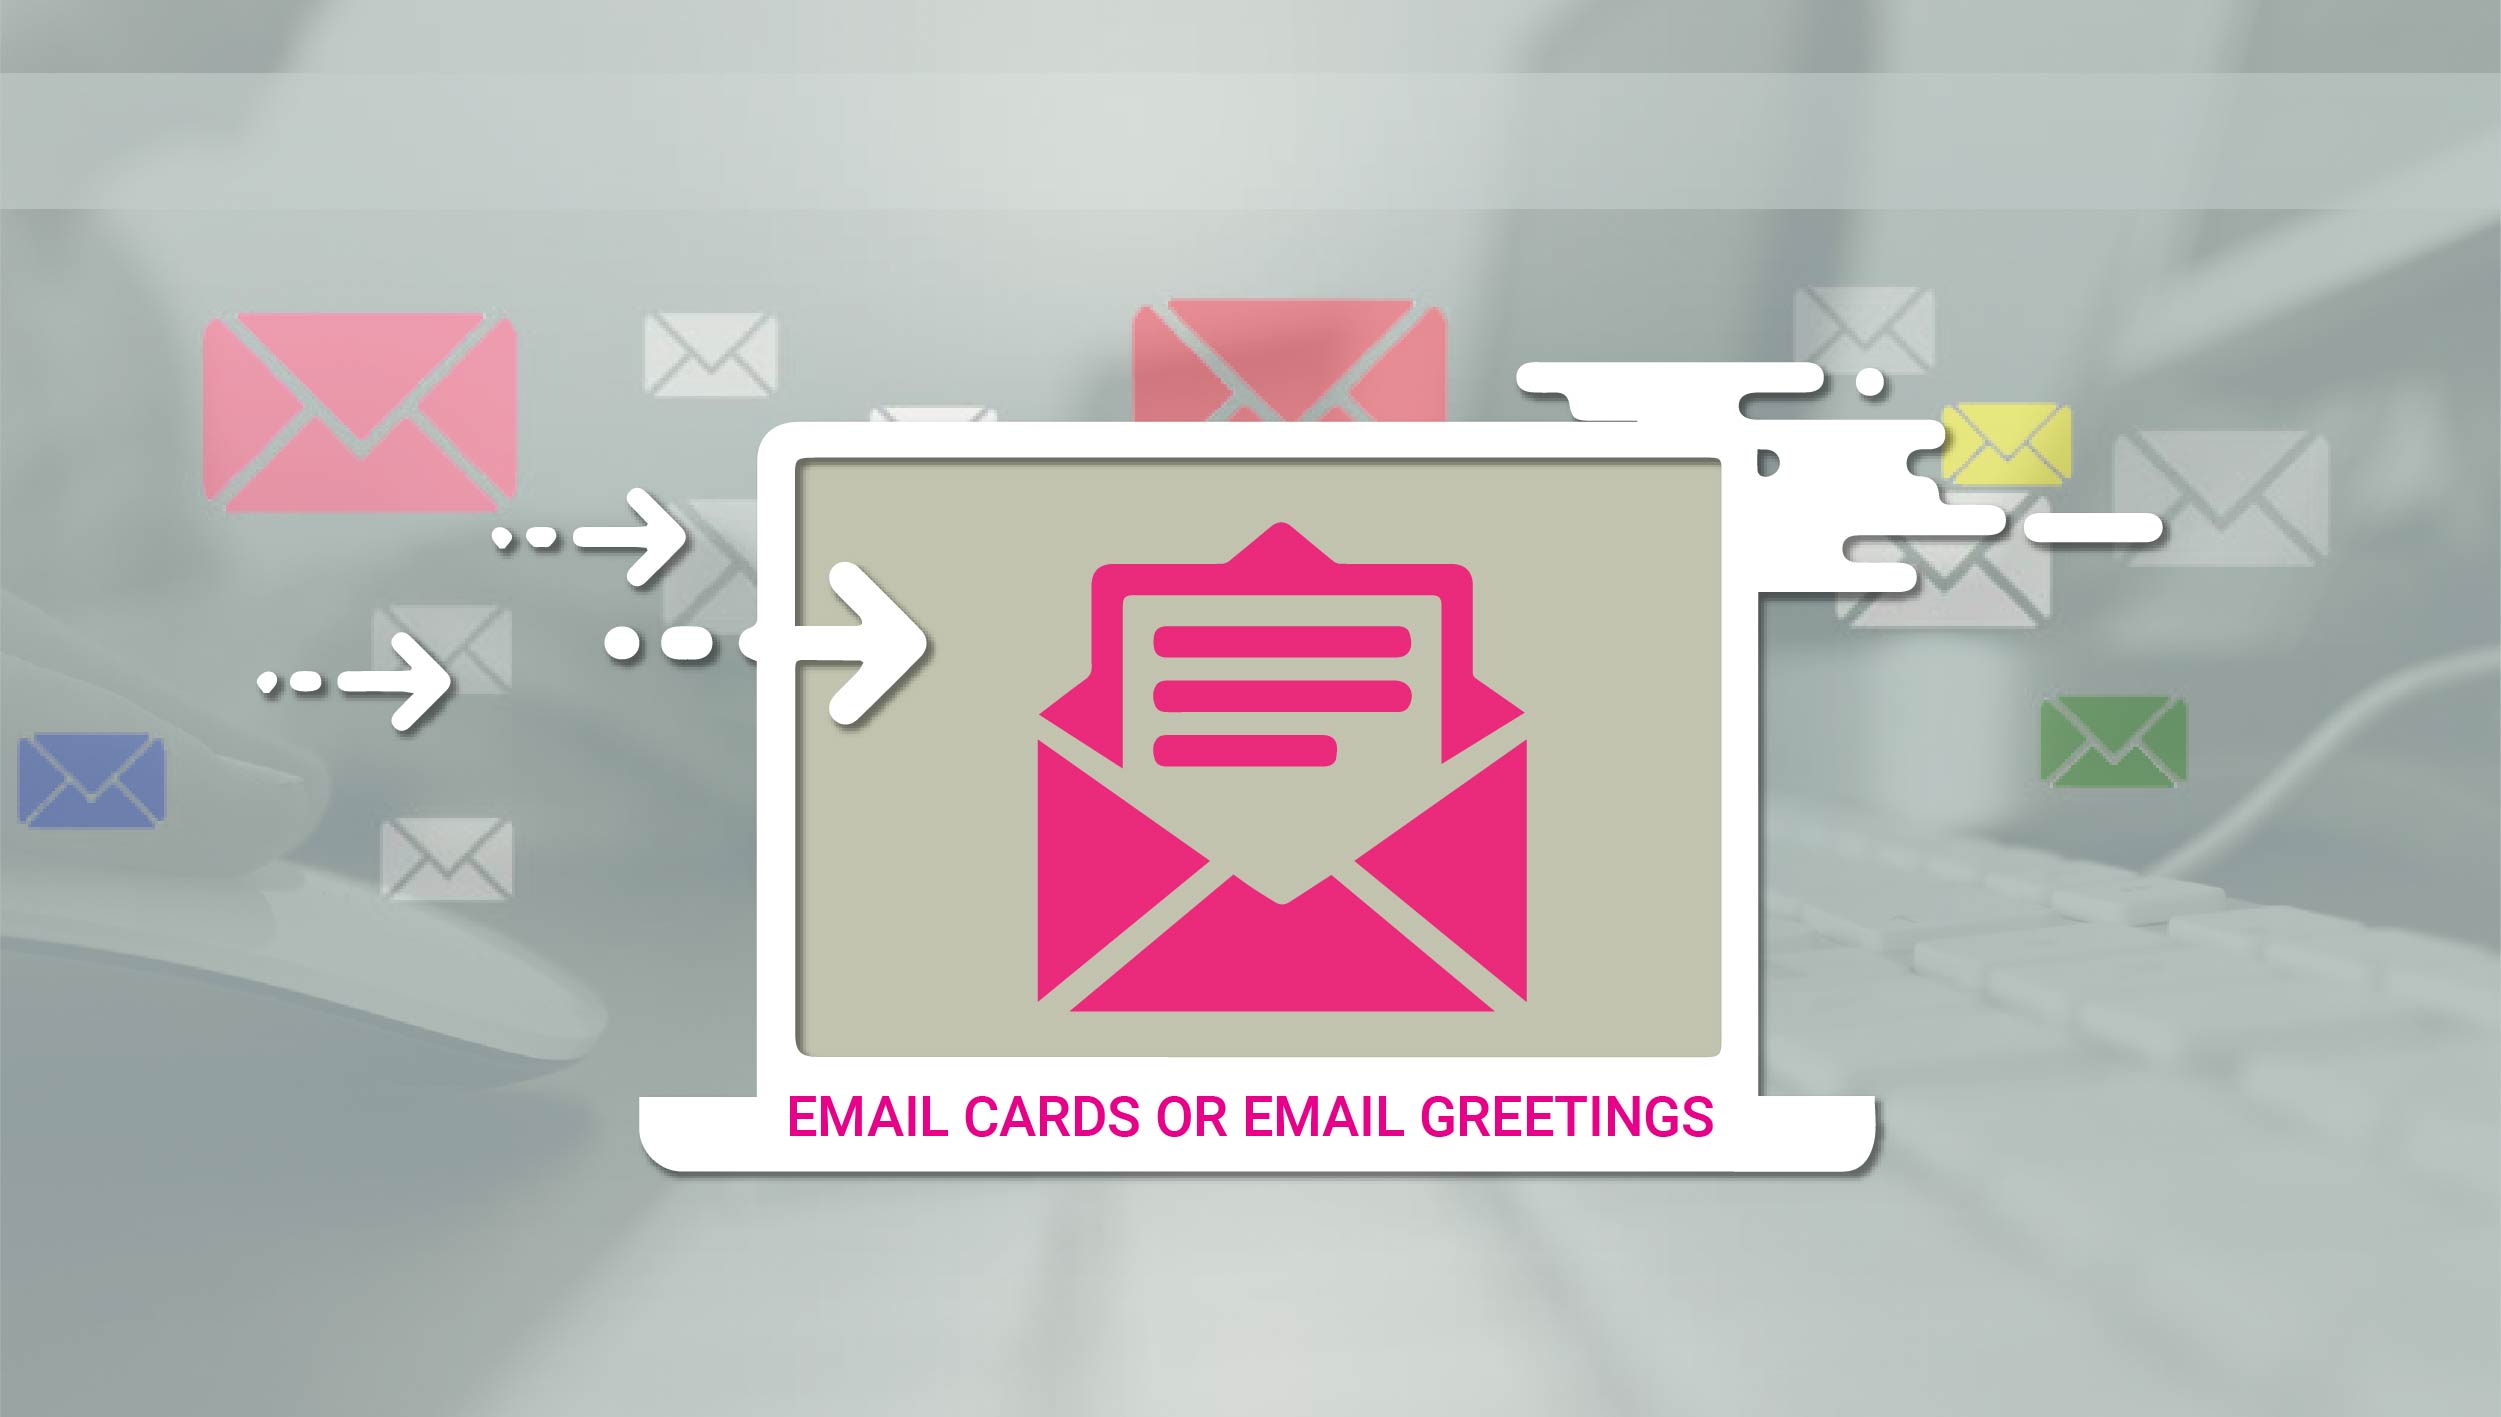 Email Cards or Email Greetings